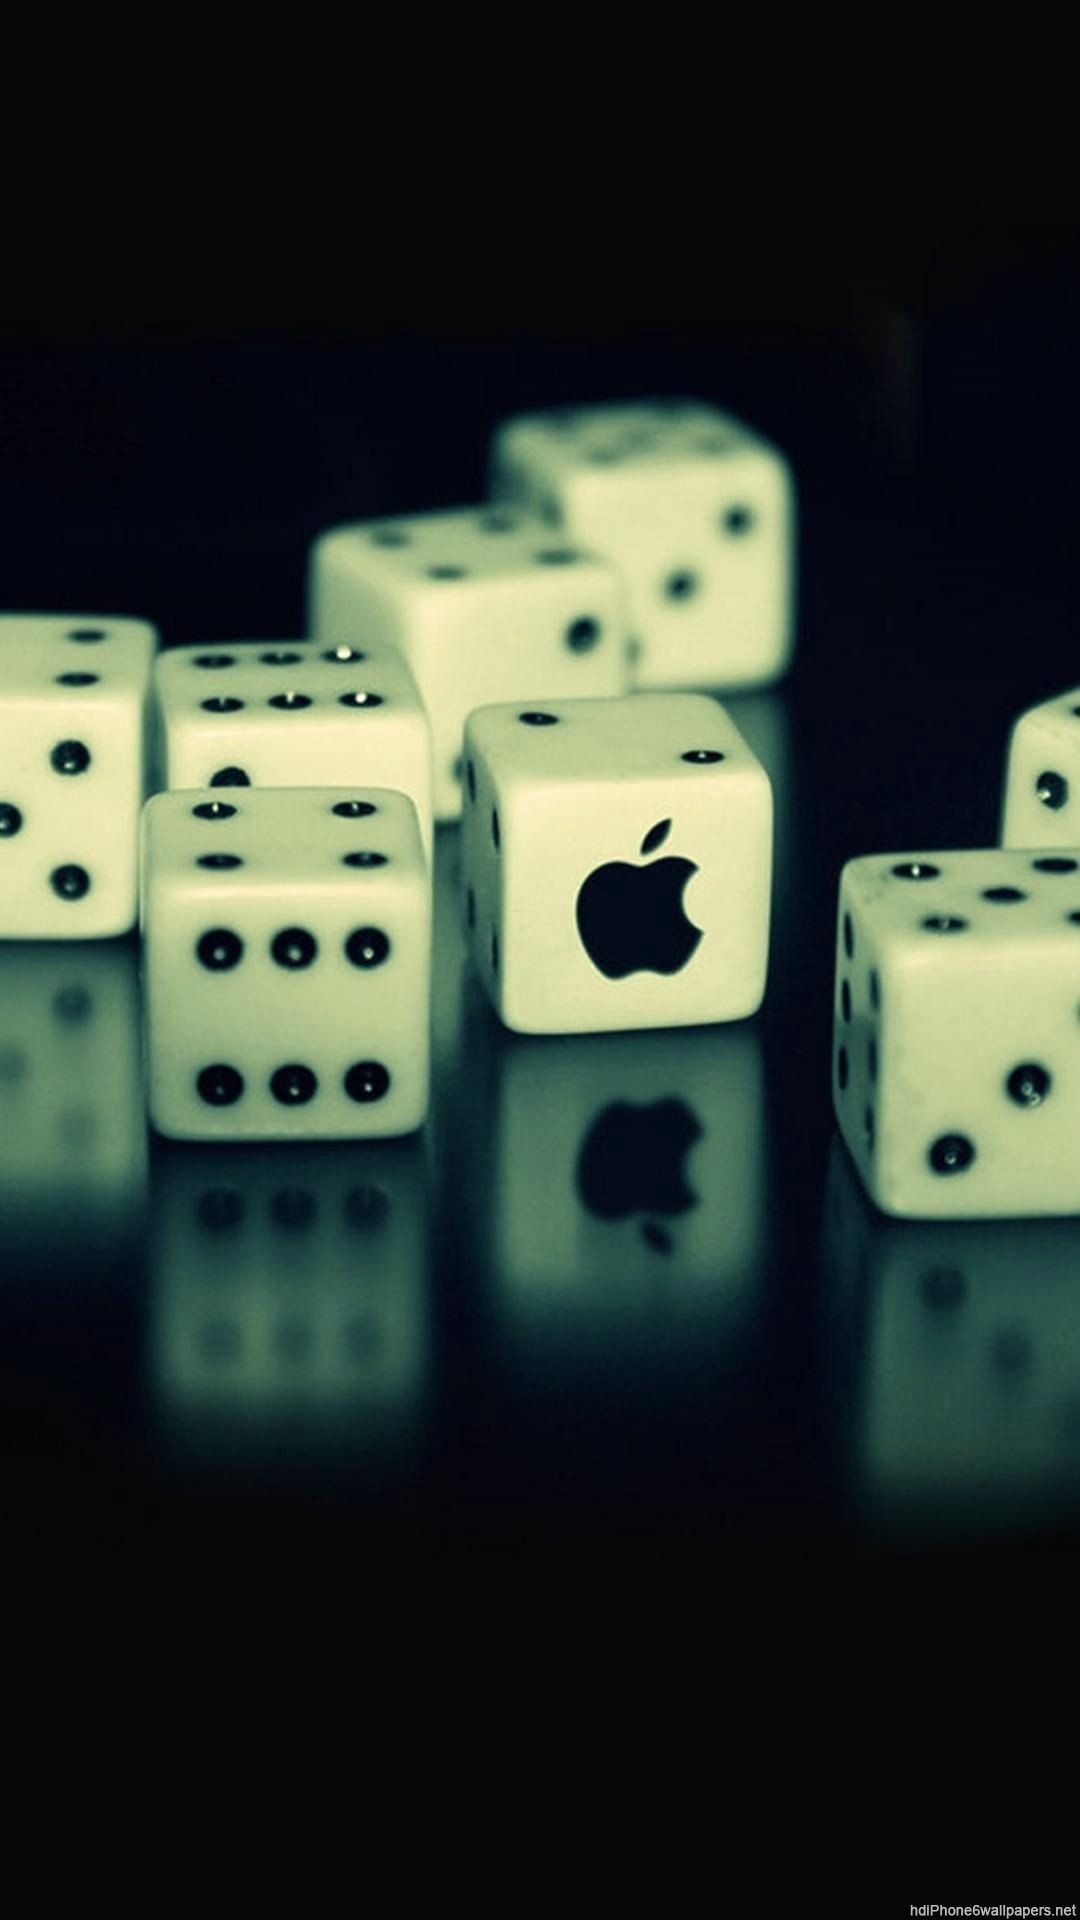 Apple Dice Computer iPhone 6 Wallpaper HD And 1080p Wallpaper For I Phone